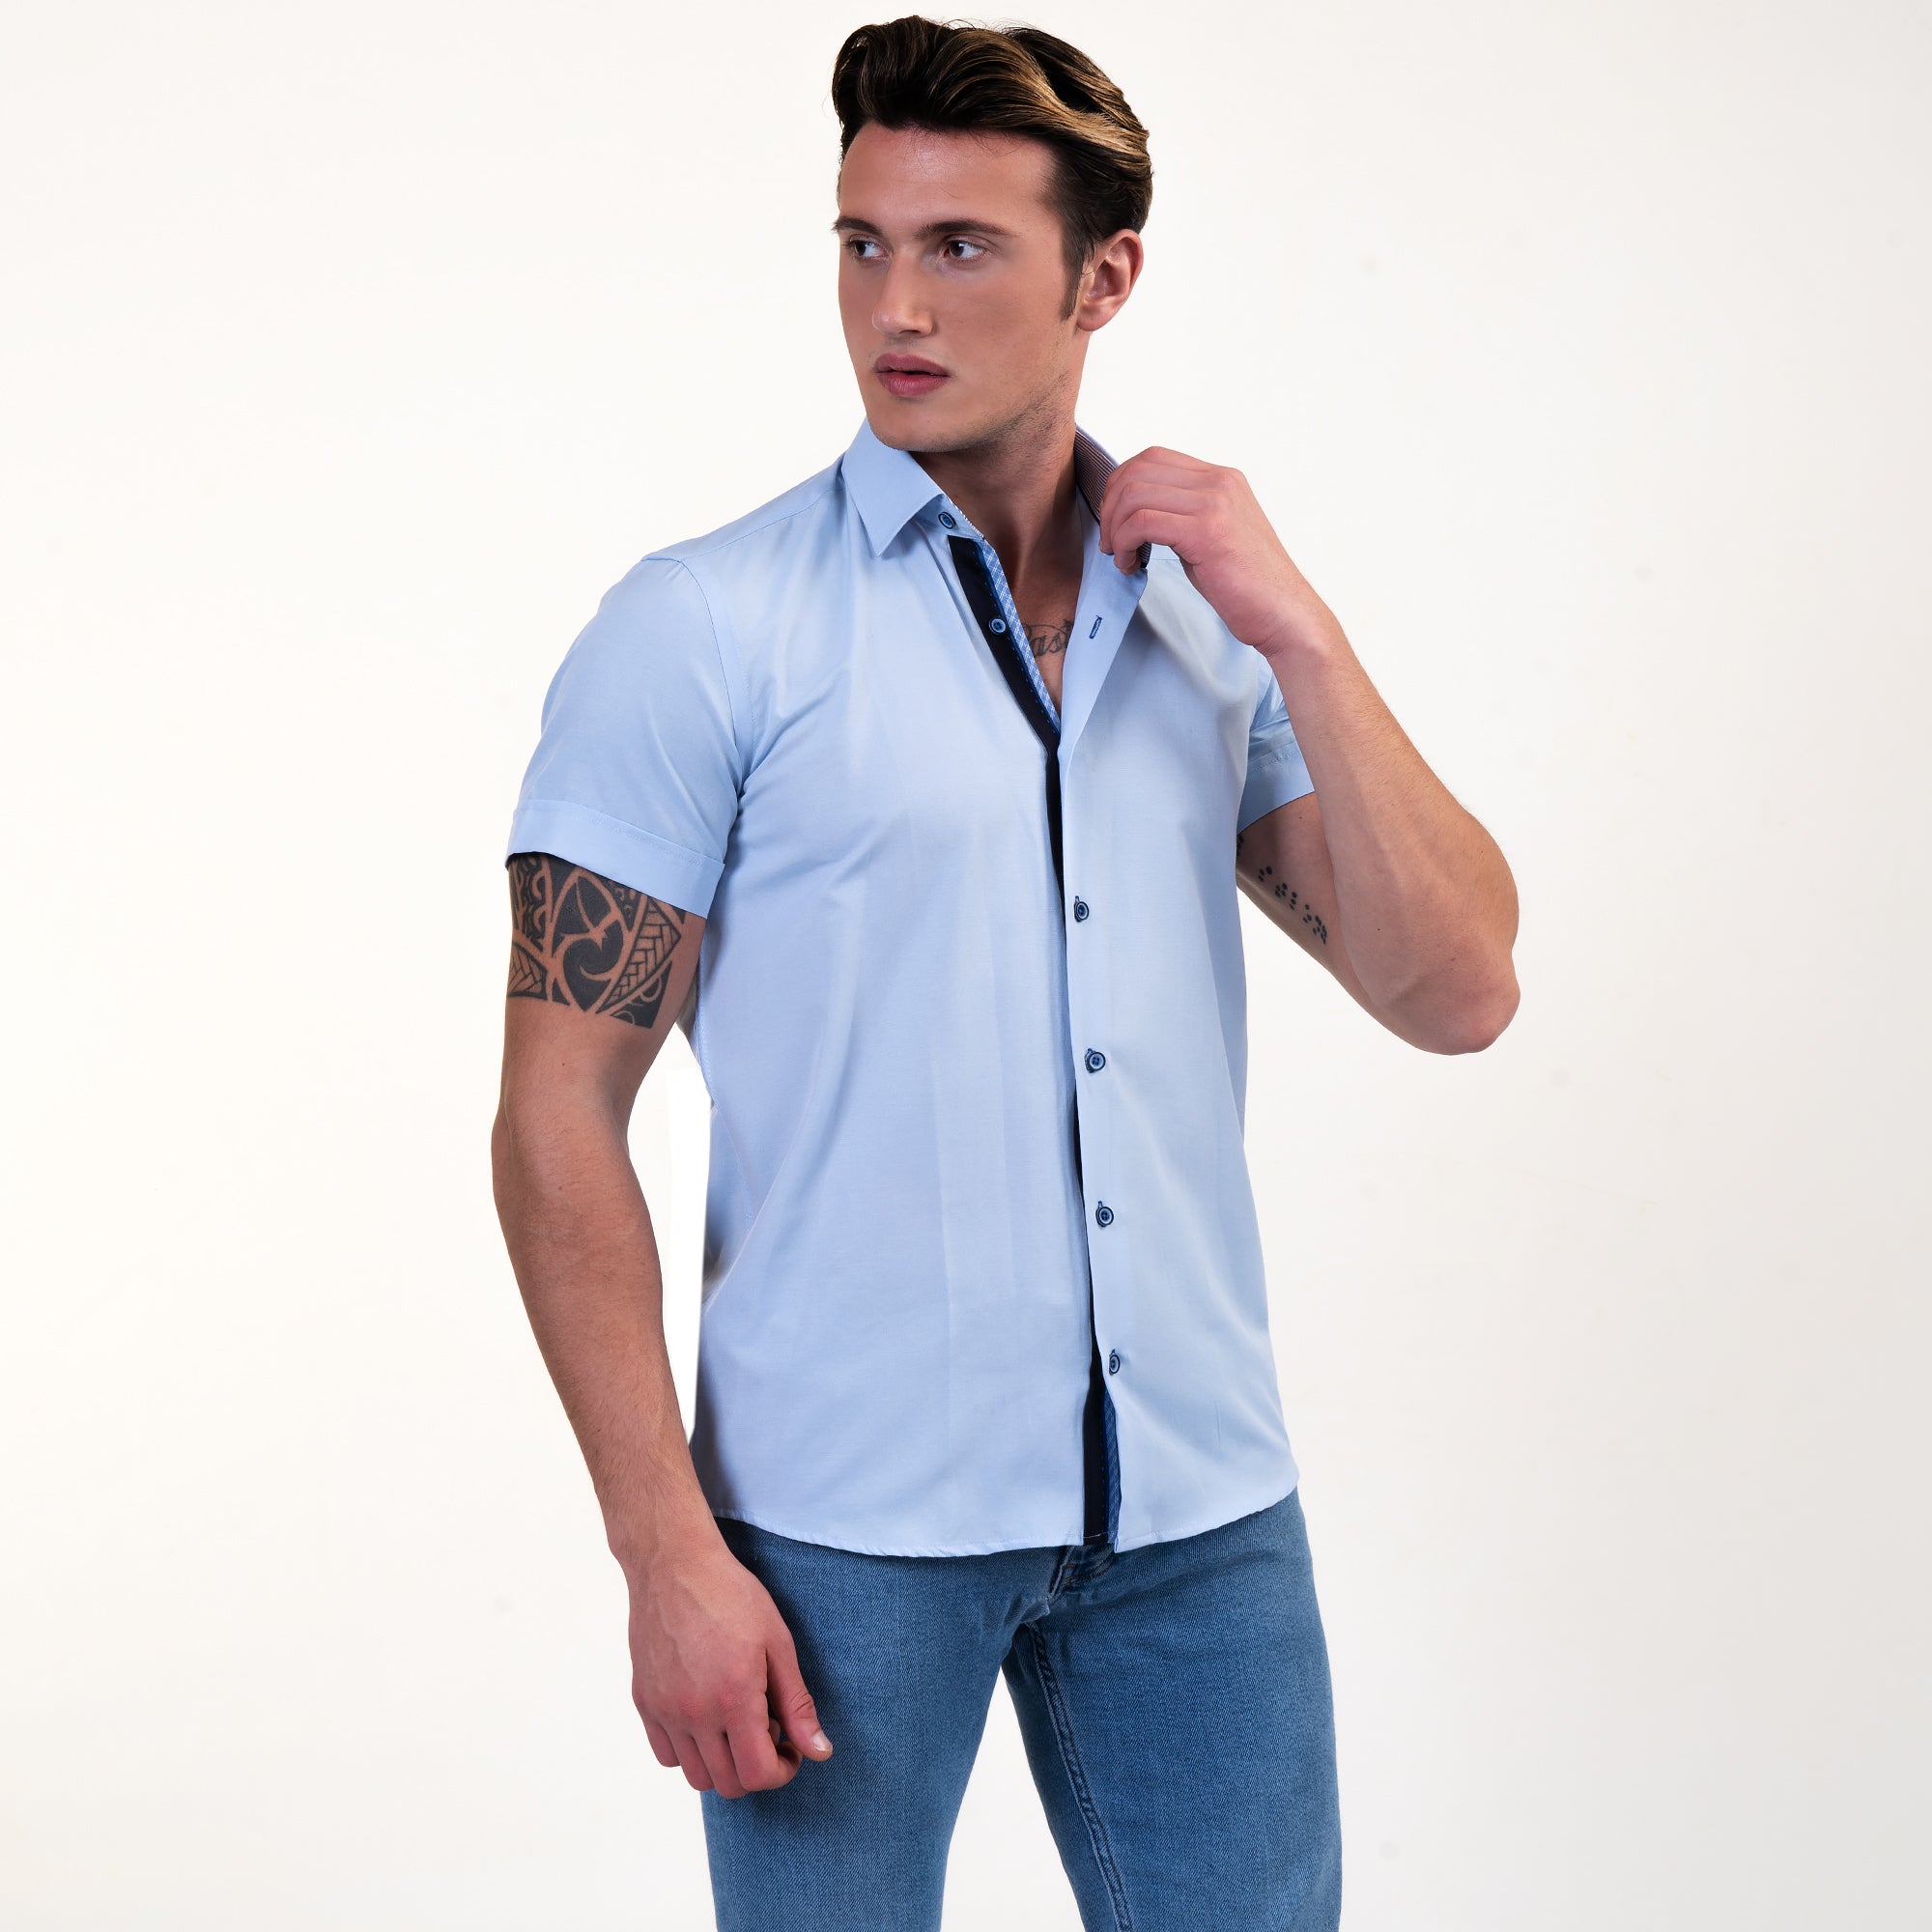 Inconsistent Uitgaan Hoogland Soft Light Blue Mens Short Sleeve Button up Shirts - Tailored Slim Fit –  Amedeo Exclusive